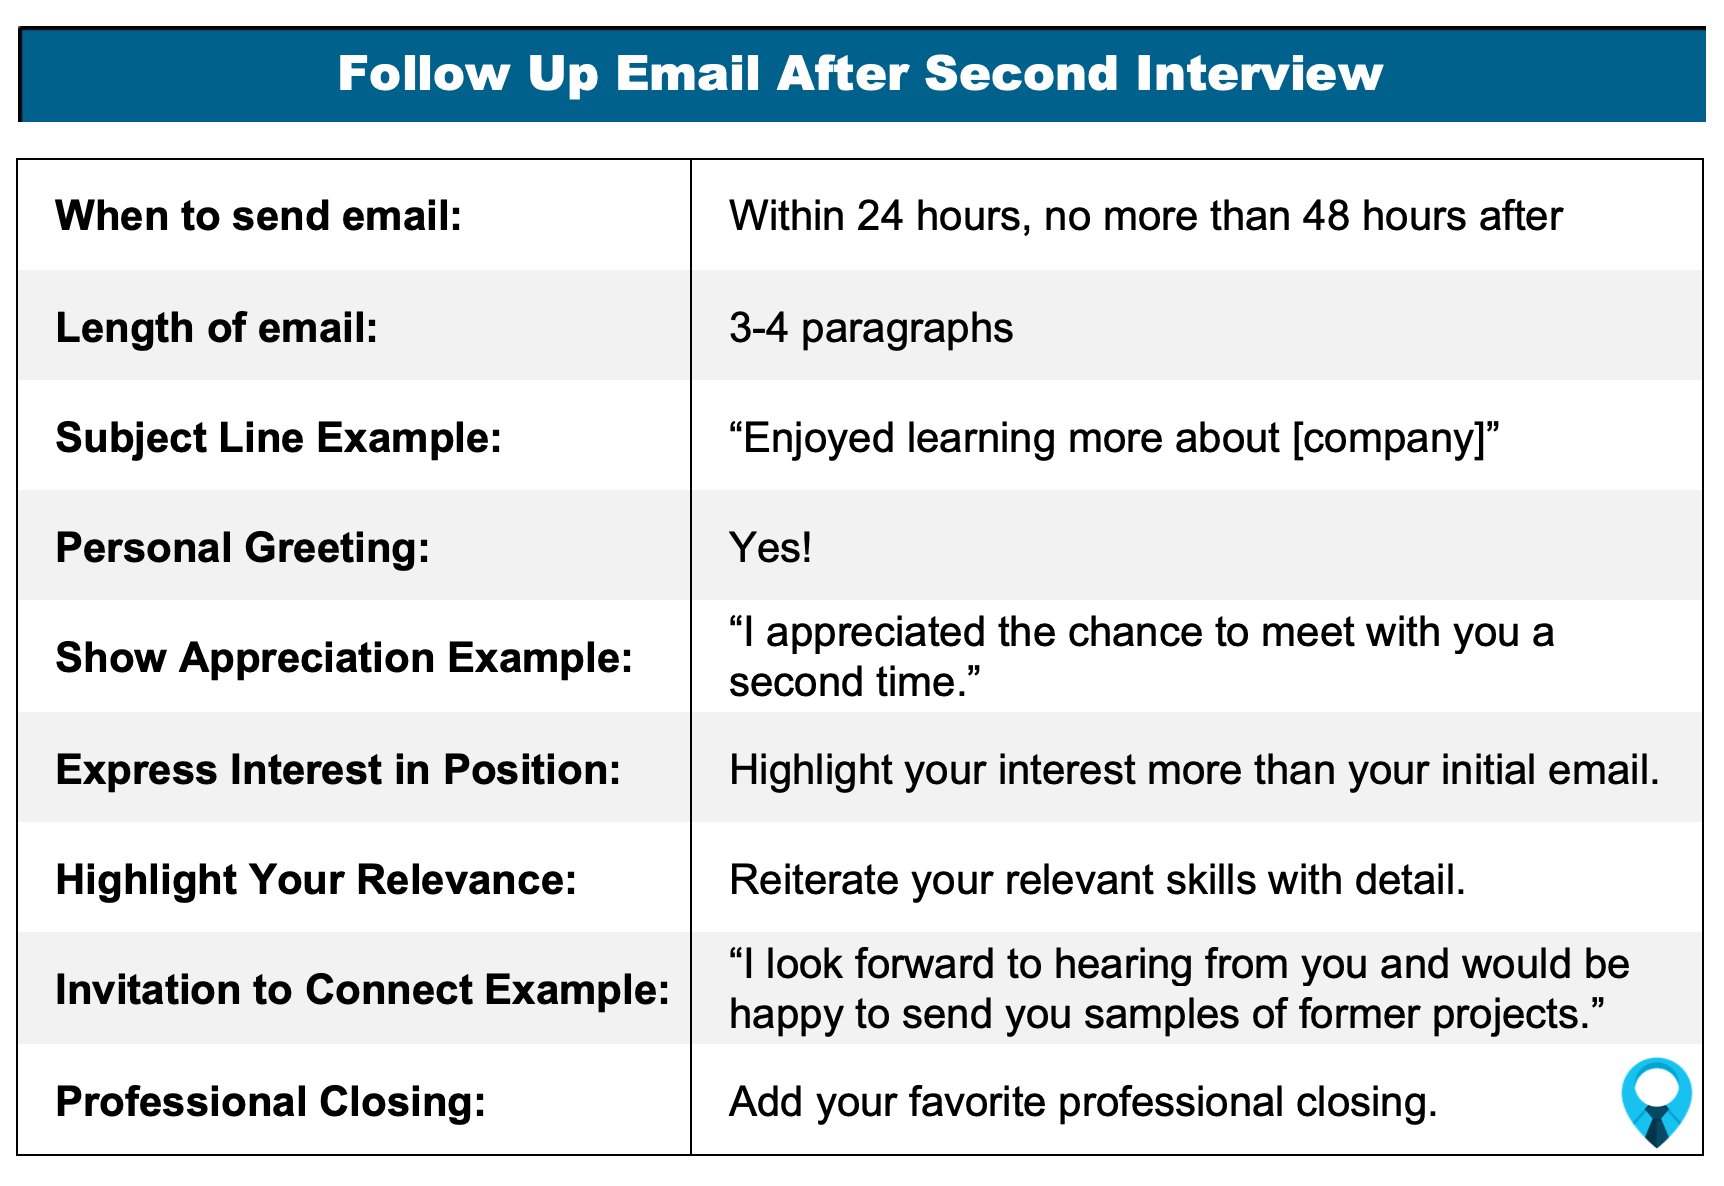 Follow-Up After Second Interview